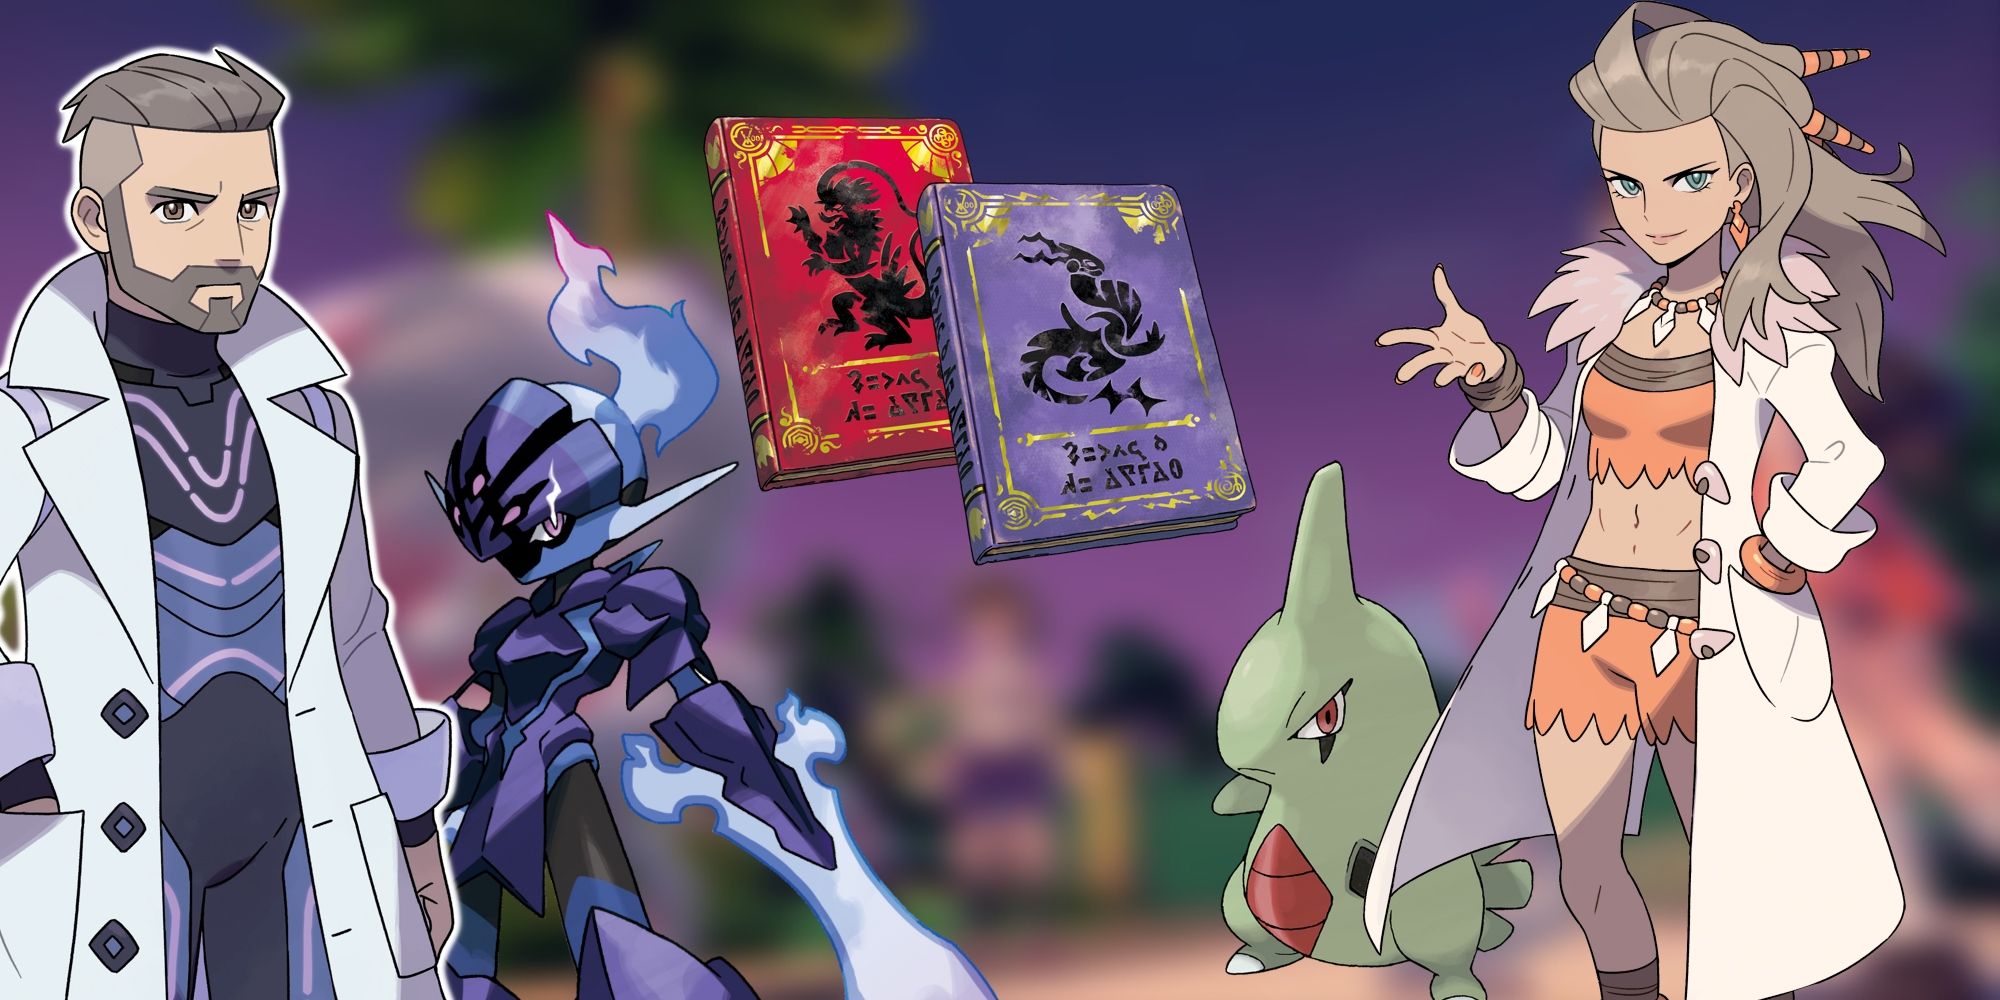 Pokemon Scarlet and Violet exclusives: Pokemon, characters, and more